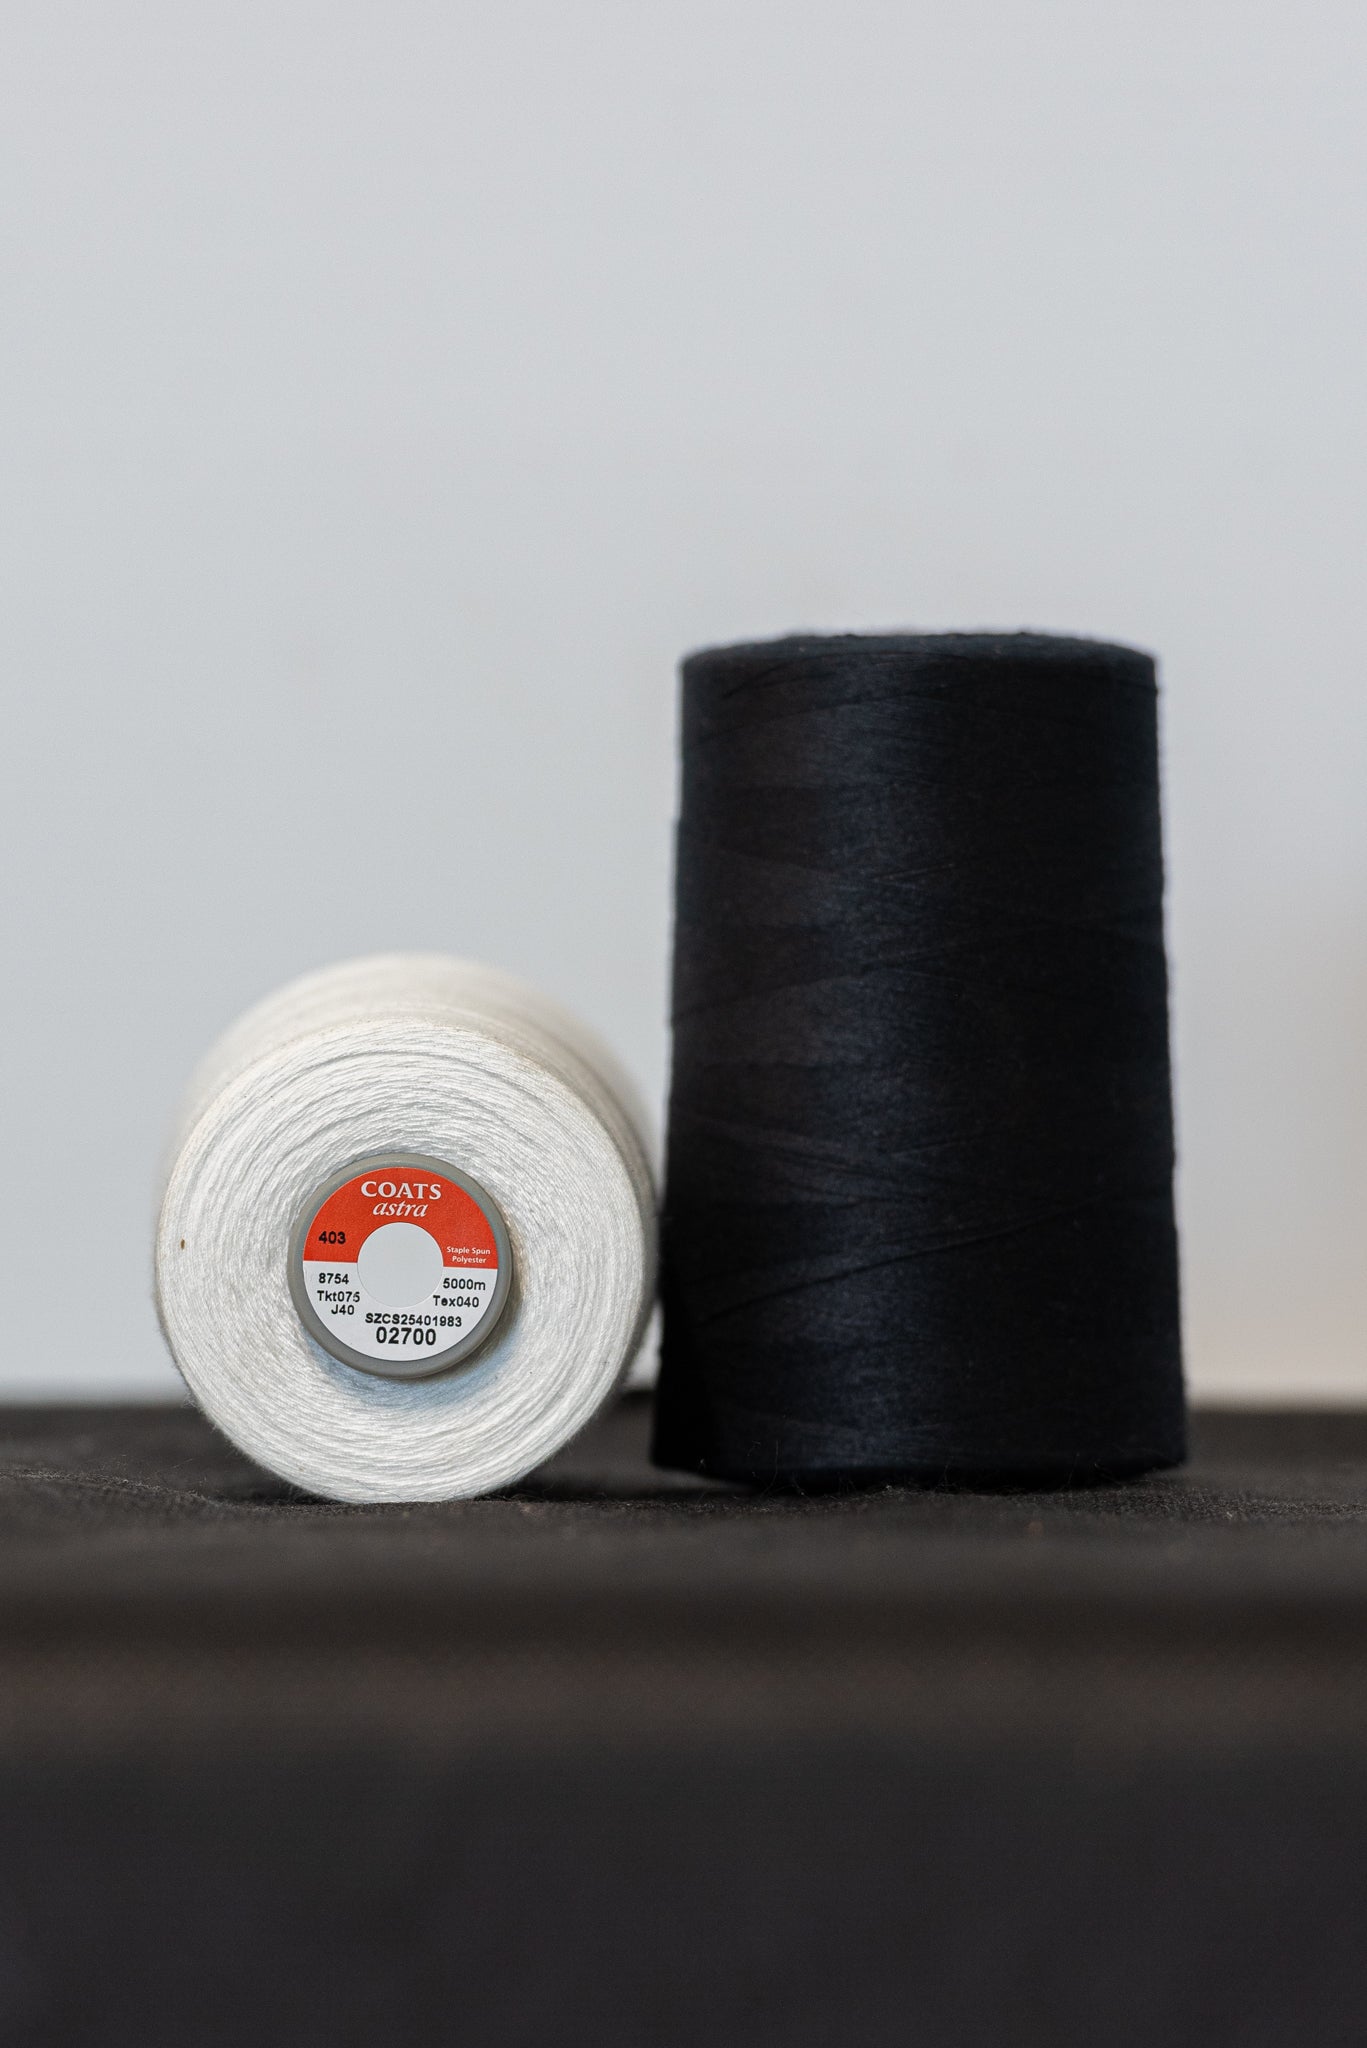 Coats astra staple spun polyester threads for sewing